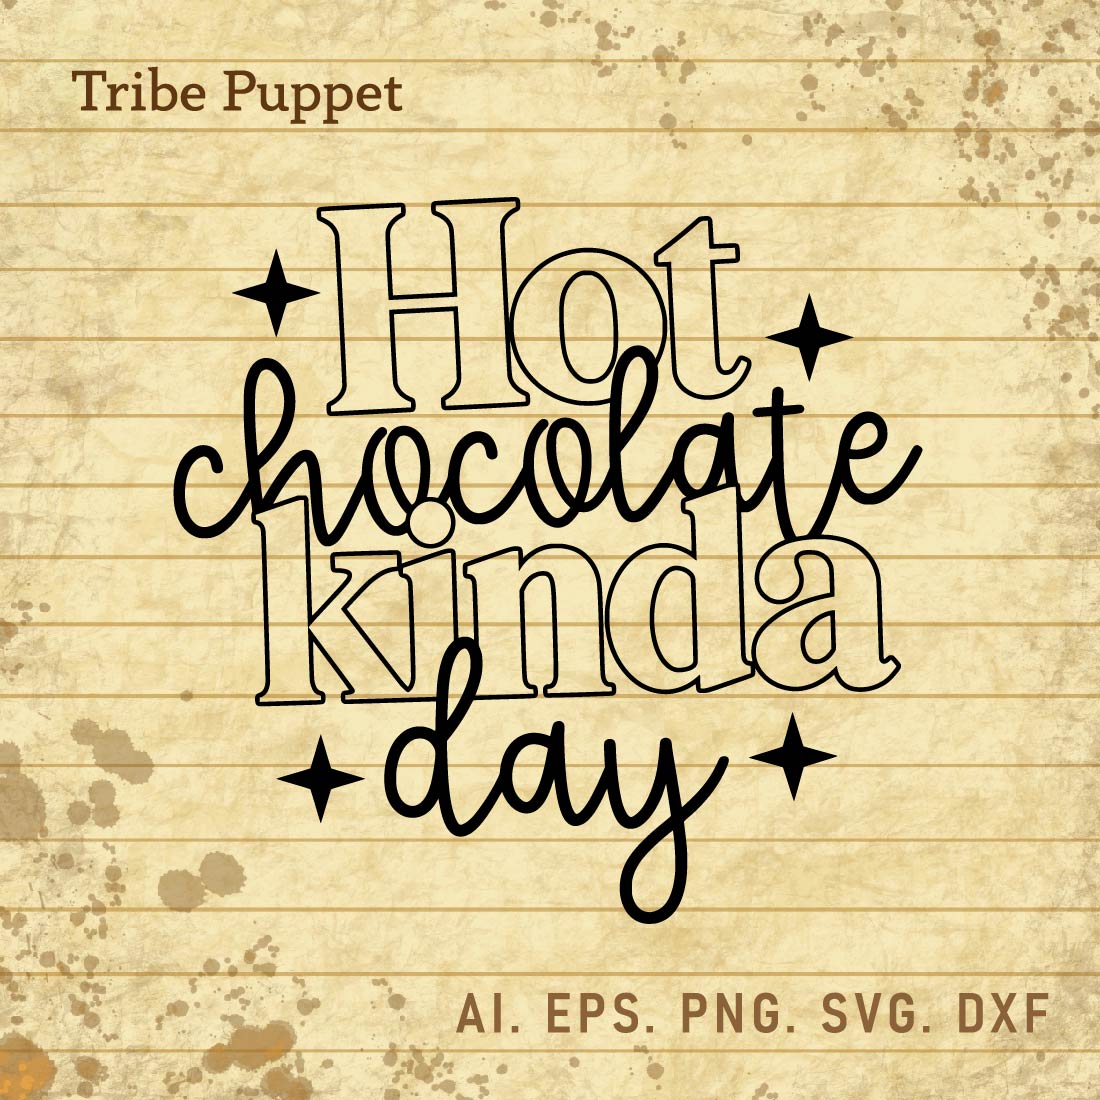 Hot Chocolate Typography cover image.